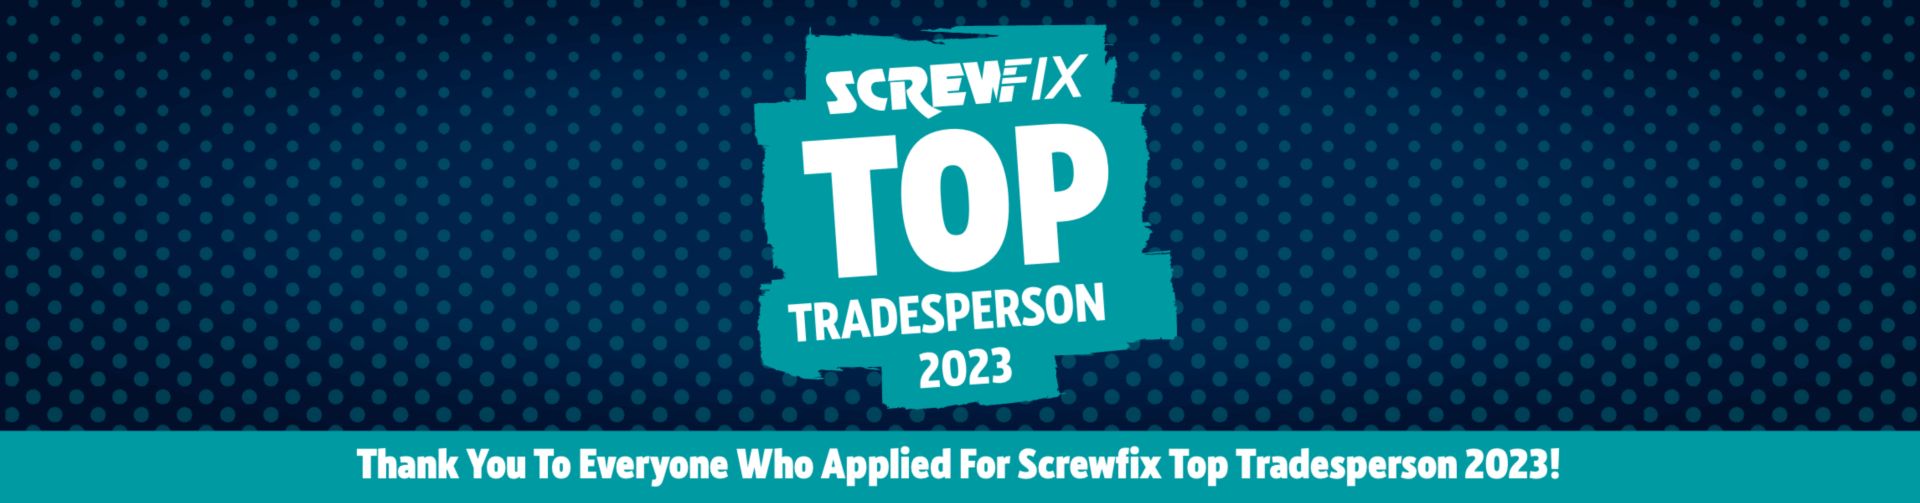 Screwfix Top Tradesperson 2023 - Thank You To Everyone Who Applied